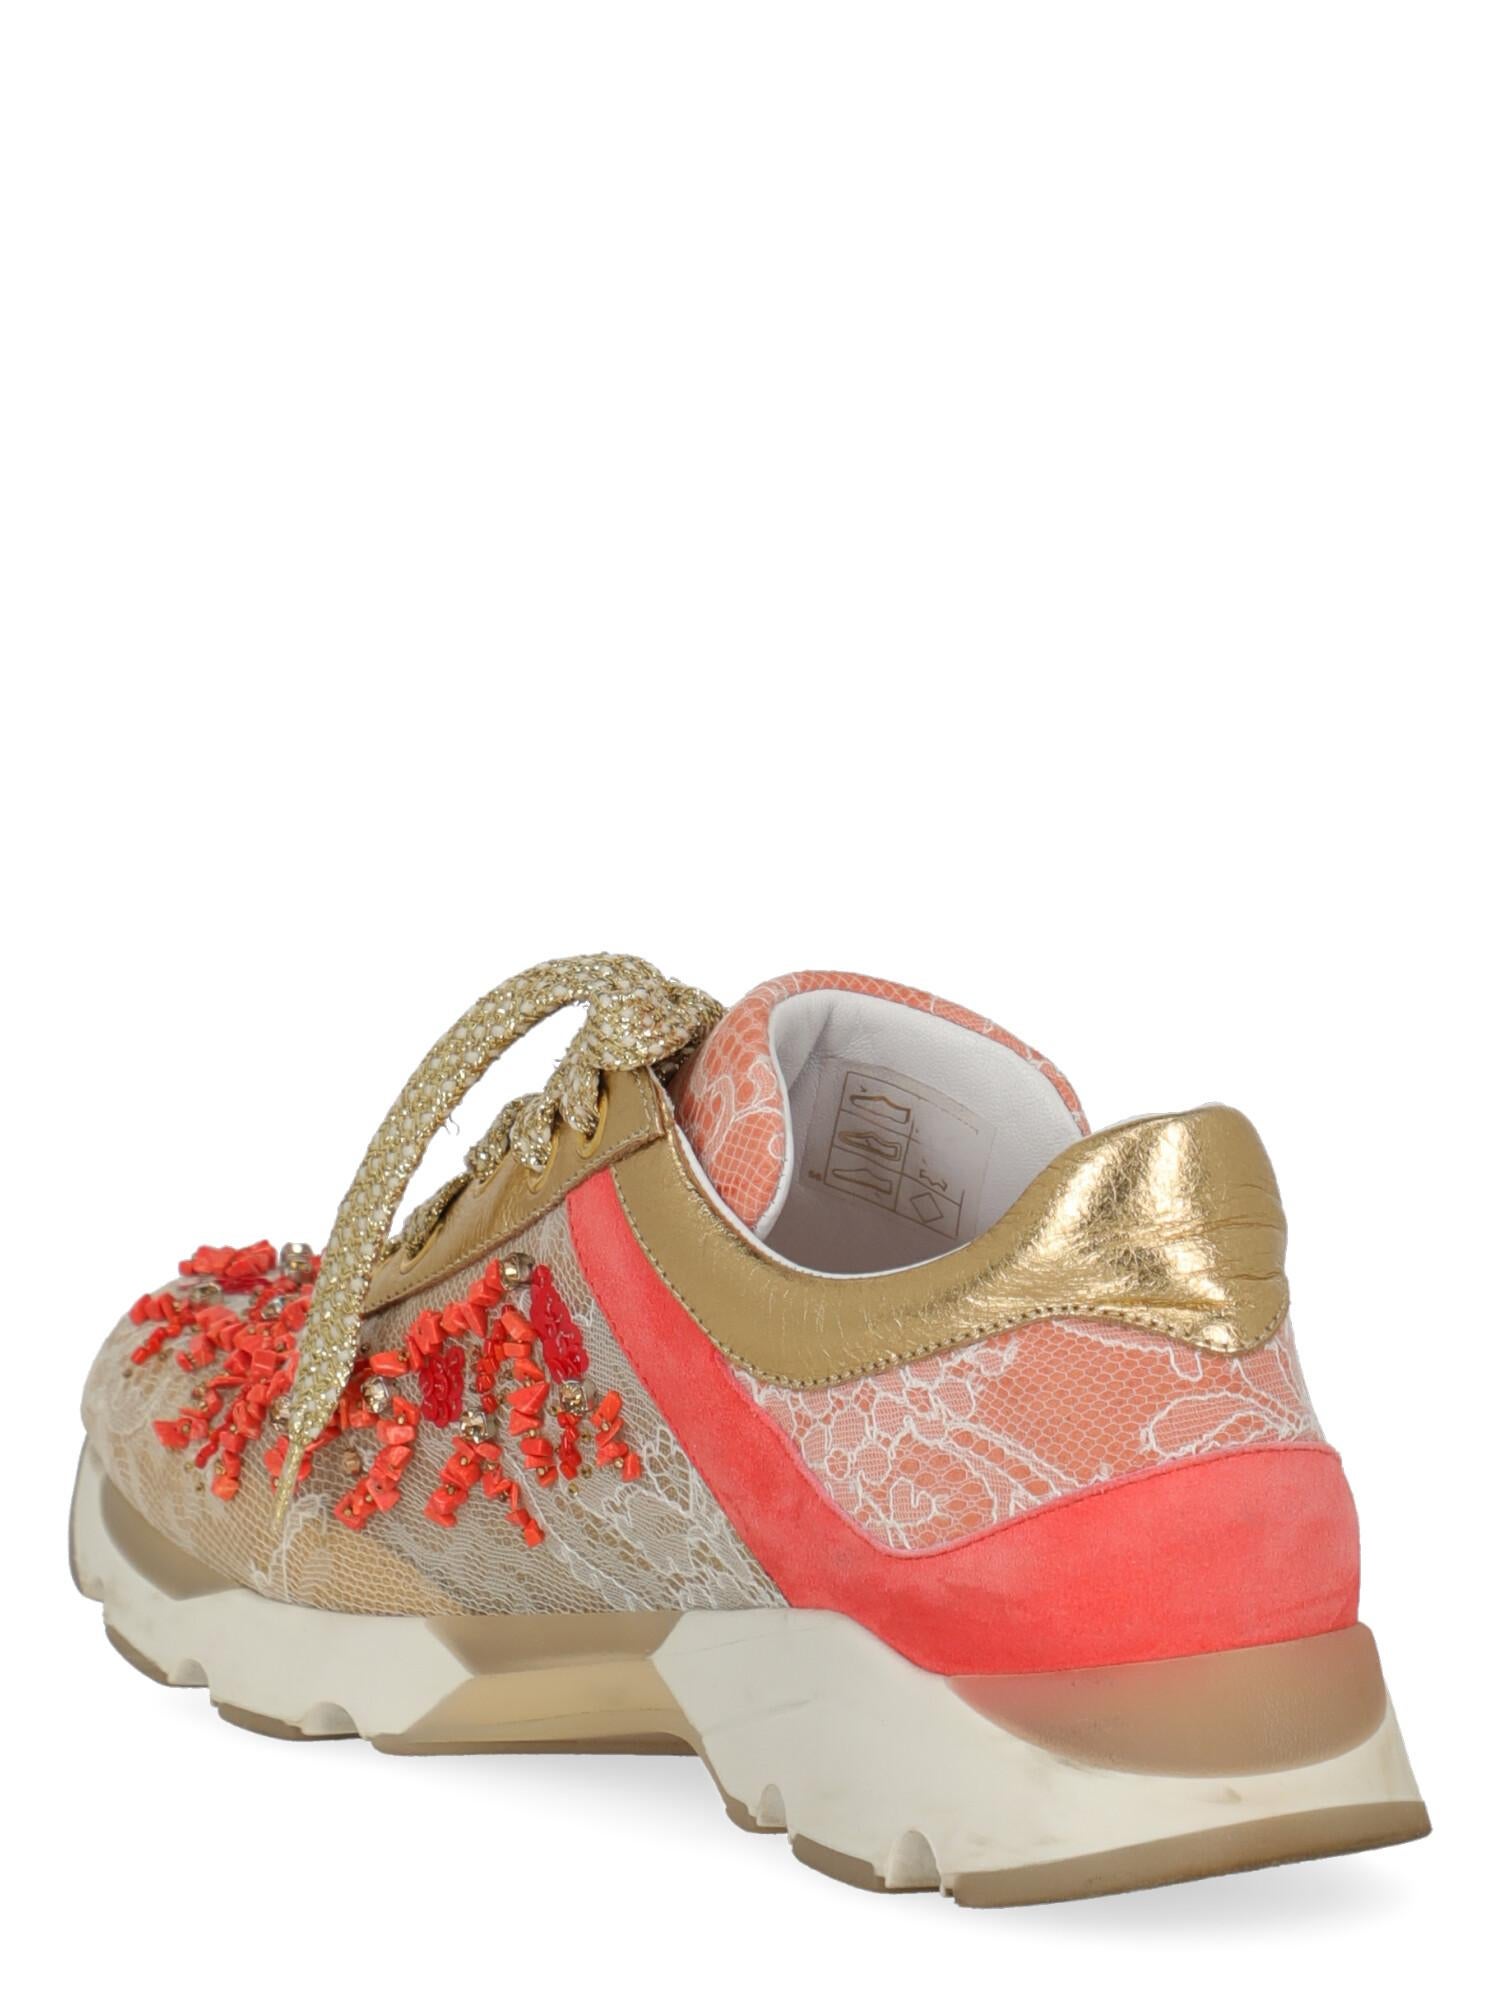 Rene Caovilla  Women   Sneakers  Pink, White Fabric EU 37 In Good Condition For Sale In Milan, IT